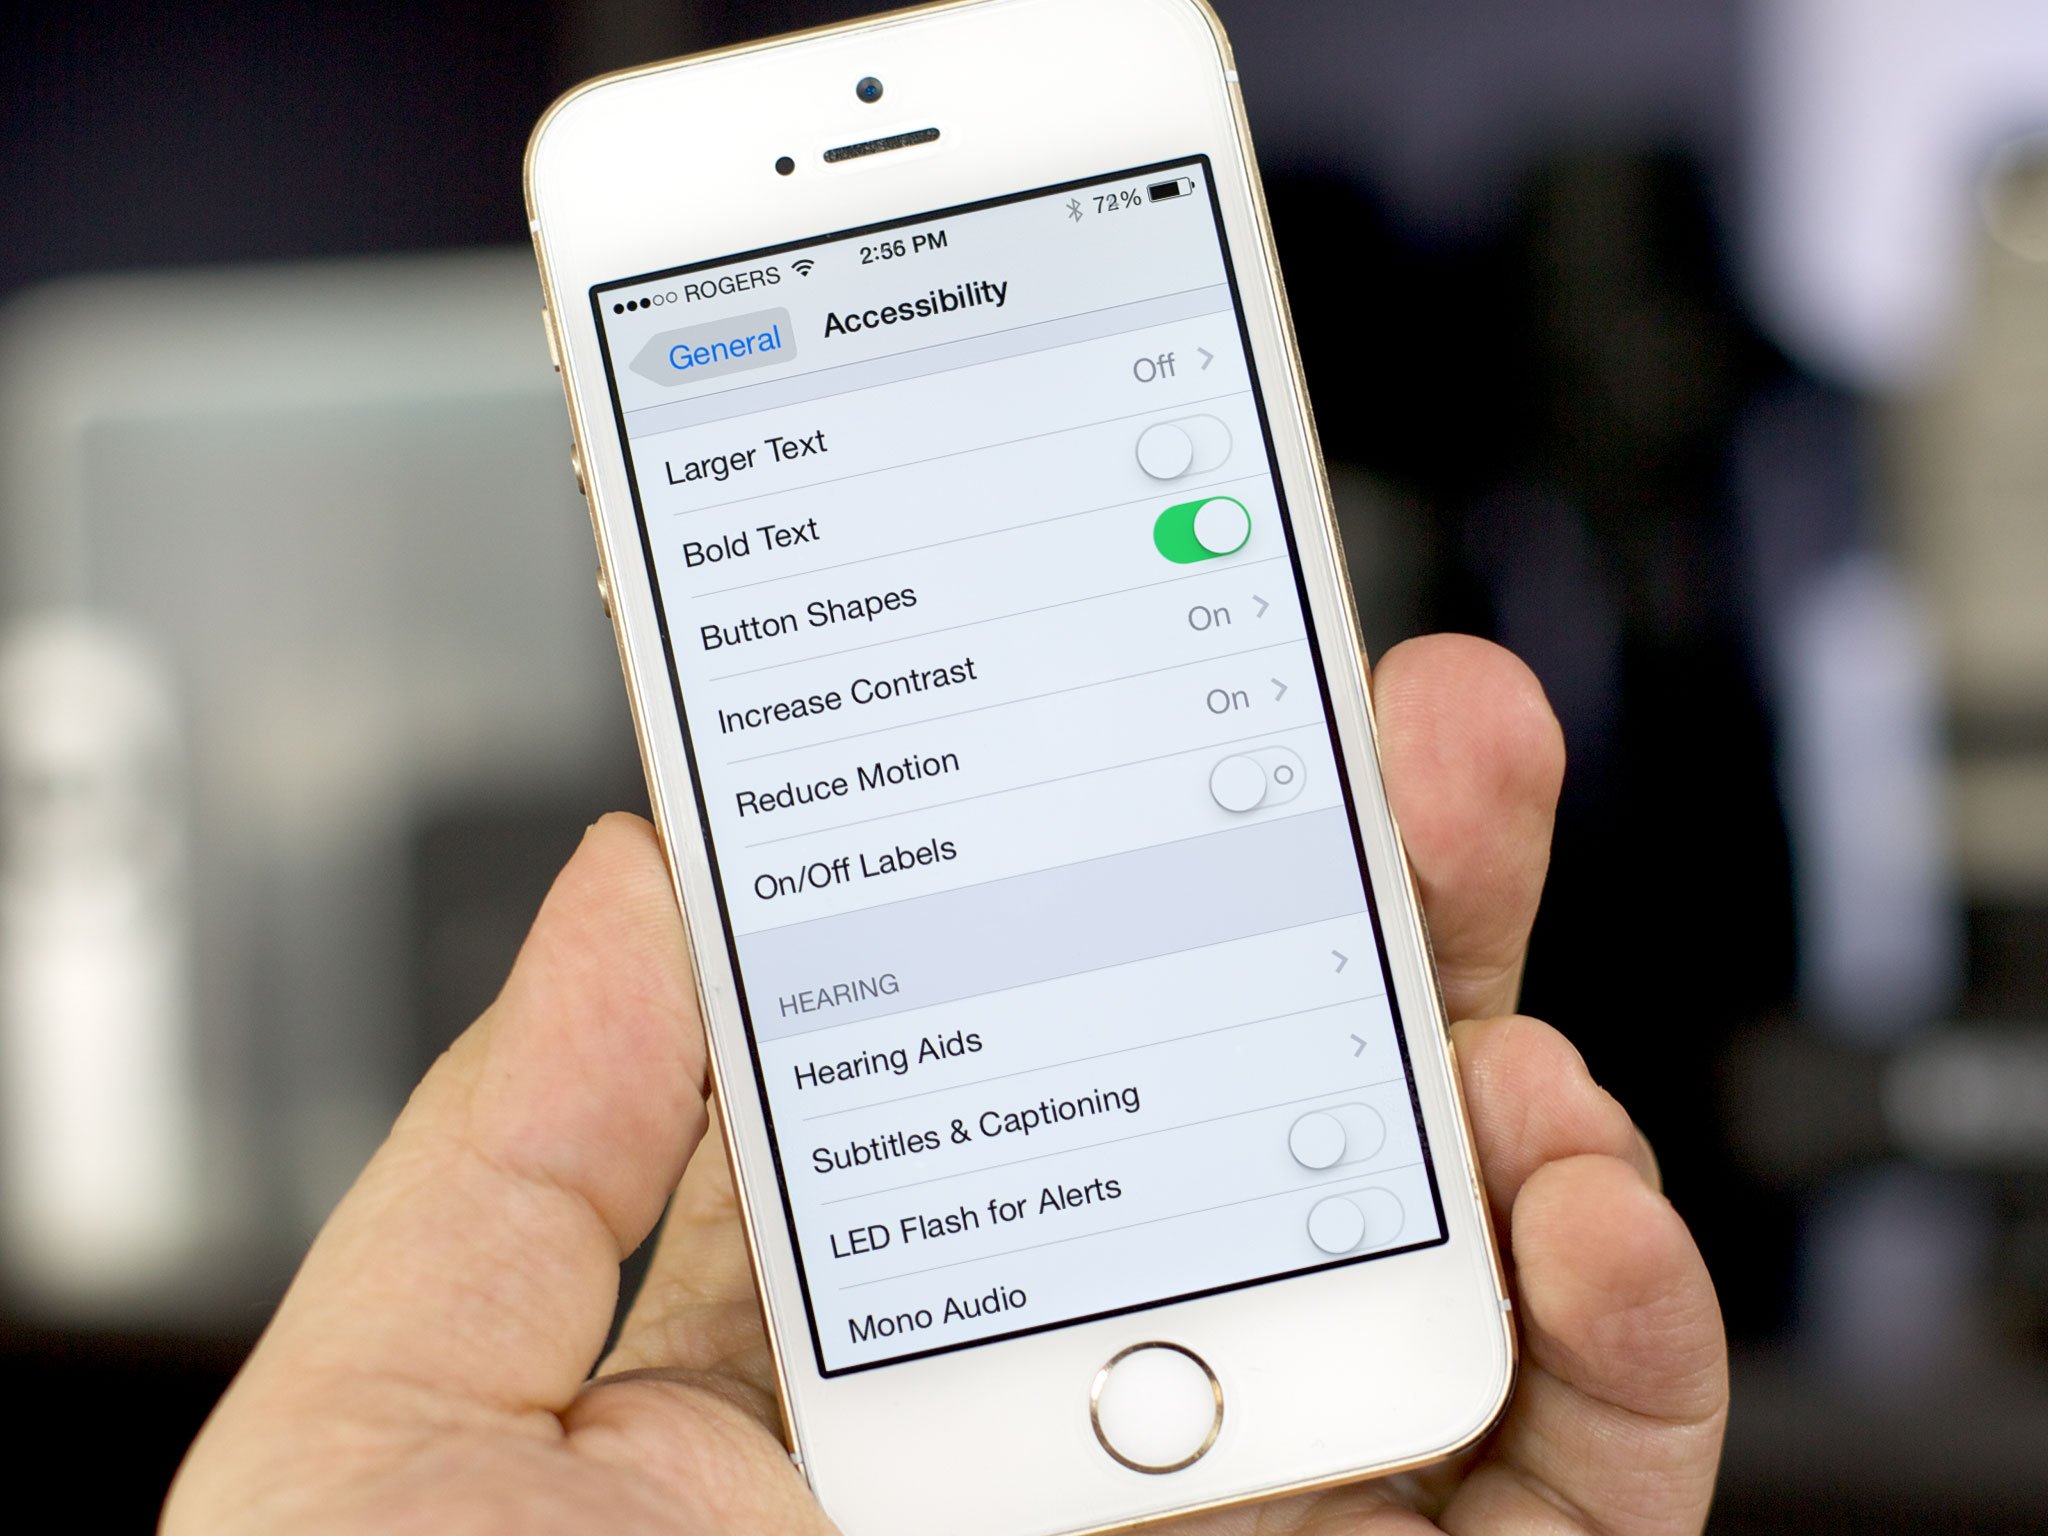 iOS 7.1 lets you take some of the magic — and all the motion sickness! — out of your iPhone and iPad